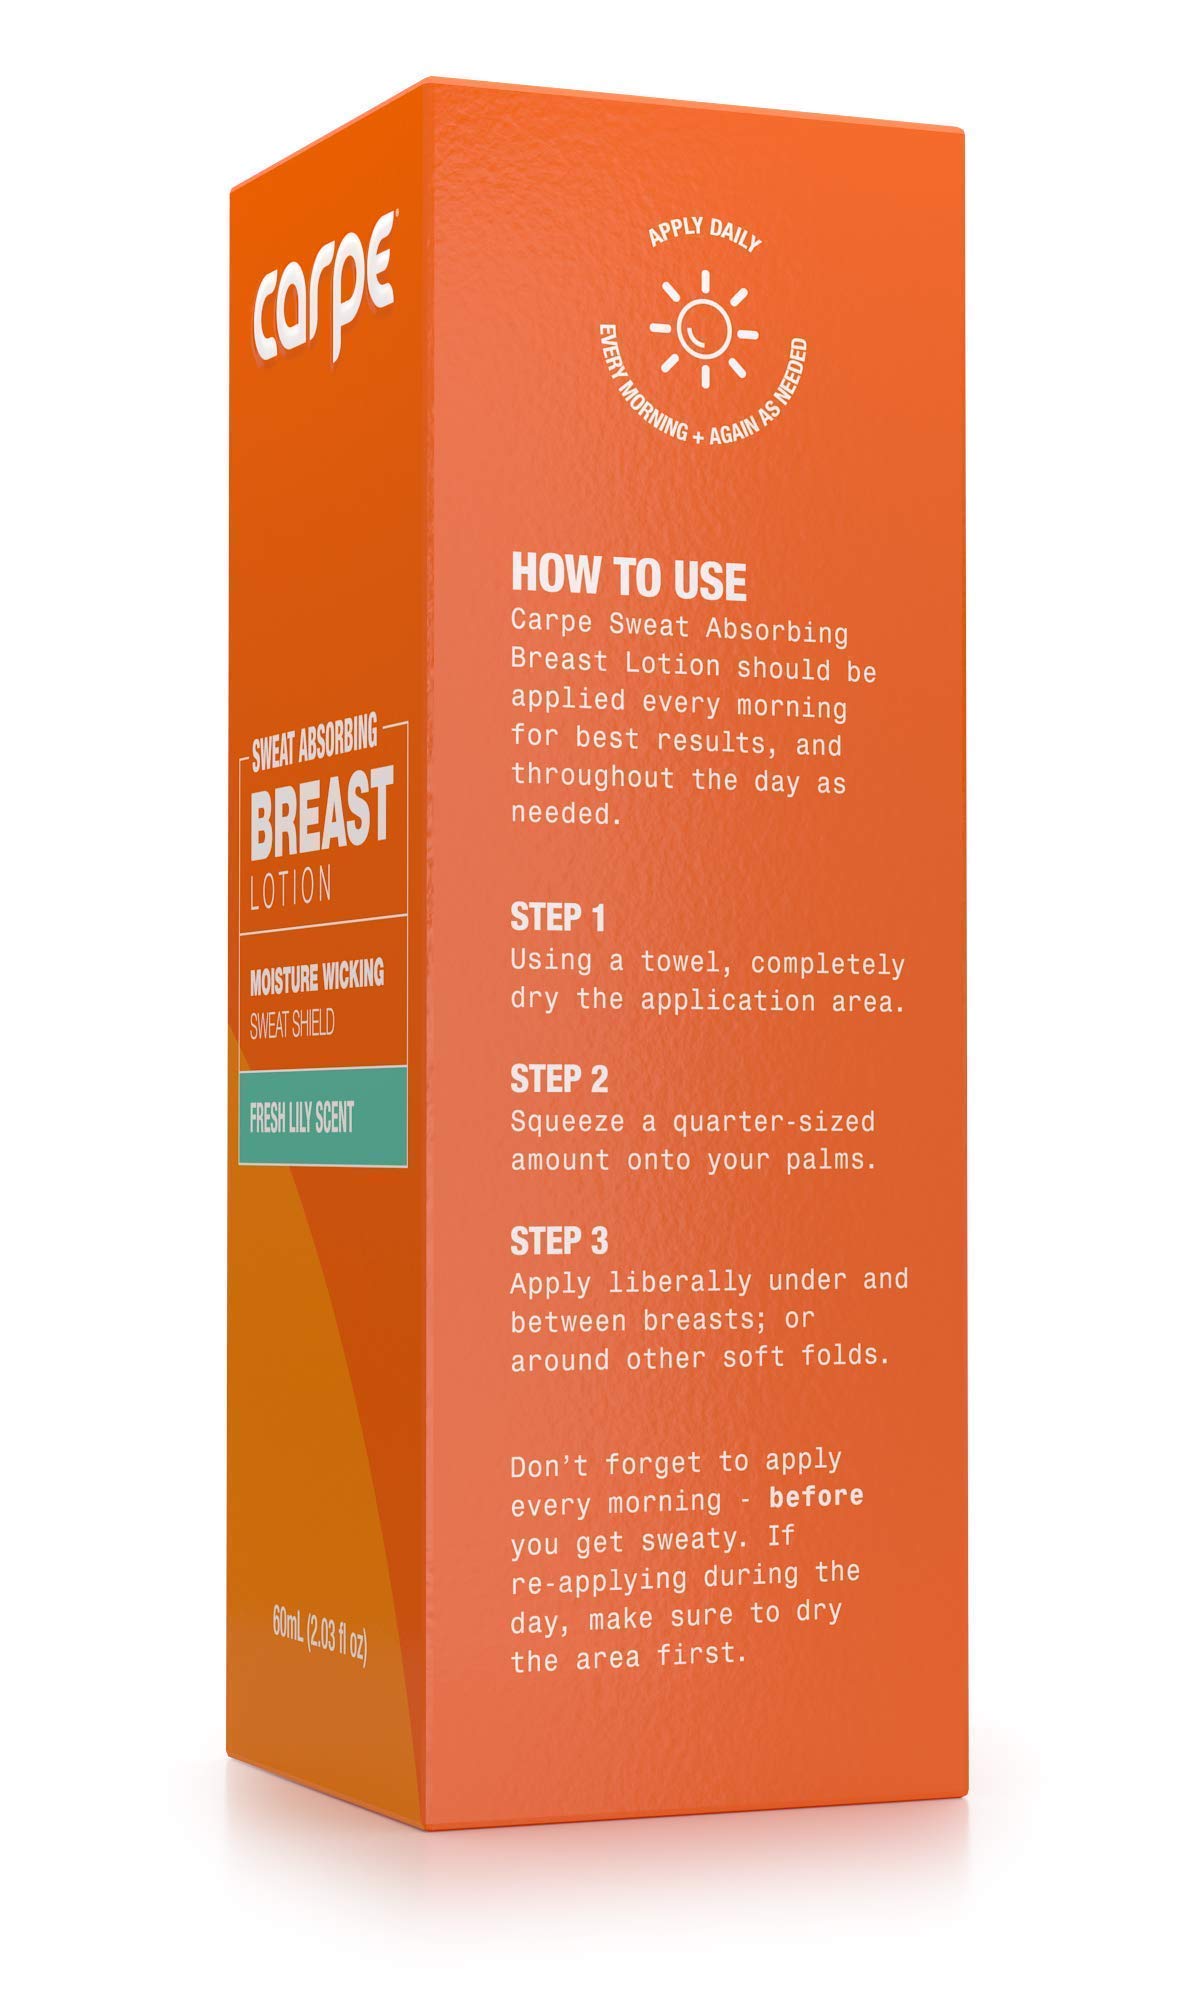 Carpe Antiperspirant Hand & Breast Package (1Hand Antiperspirant & 1Breast Sweat Absorbing), Stop Excessive Sweat, Hyperhidrosis Protection, Dermatologist Recommended.